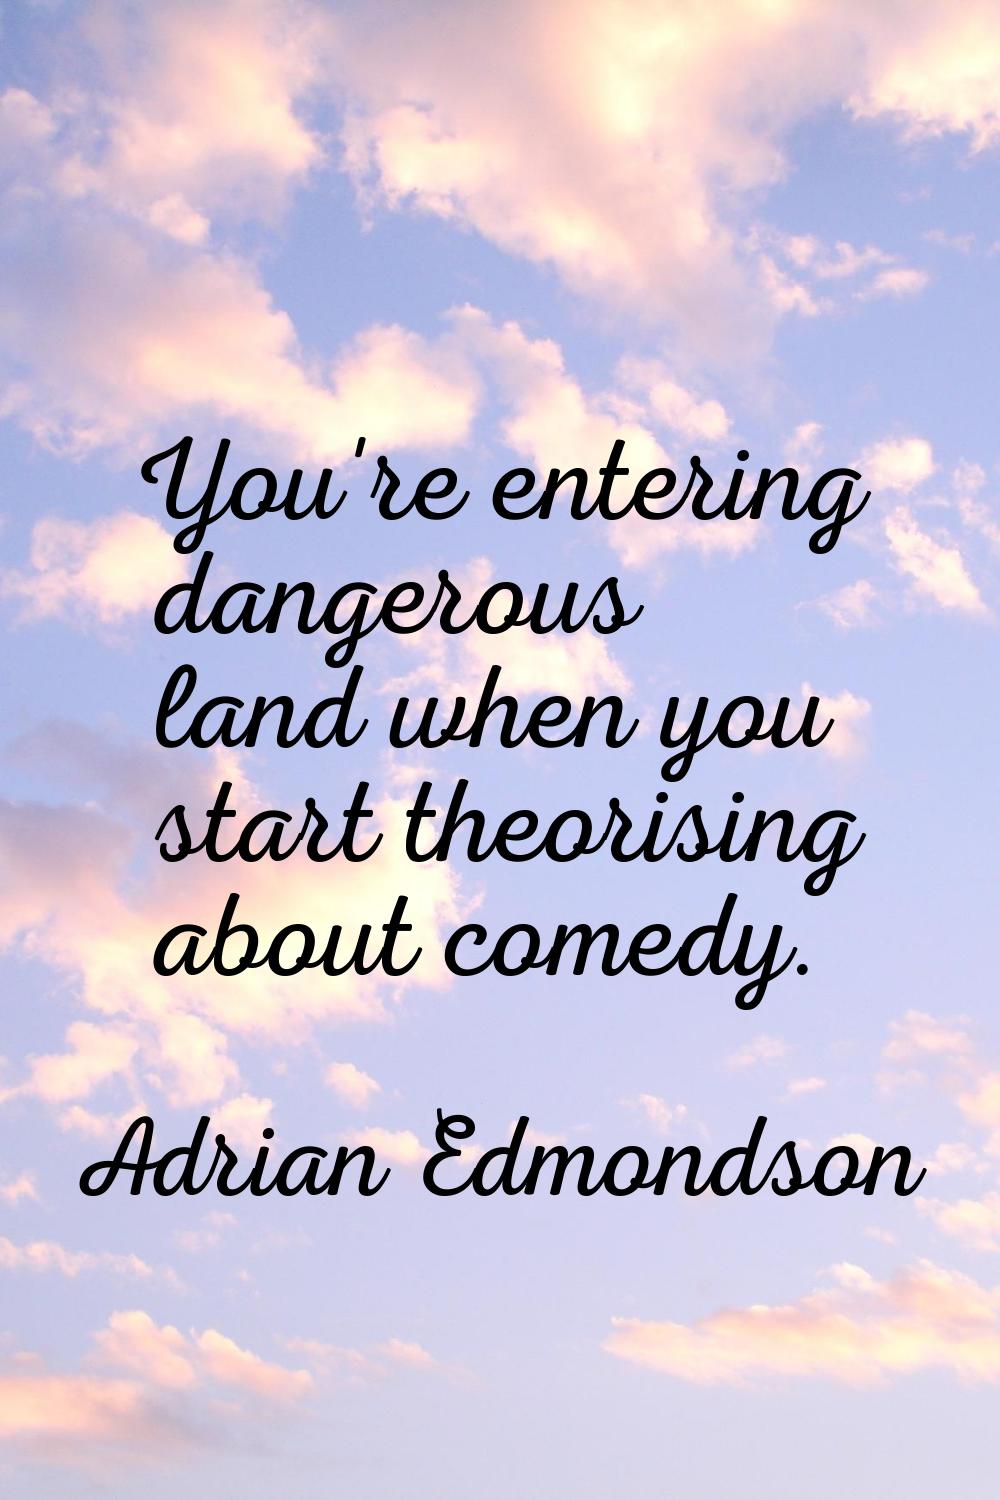 You're entering dangerous land when you start theorising about comedy.